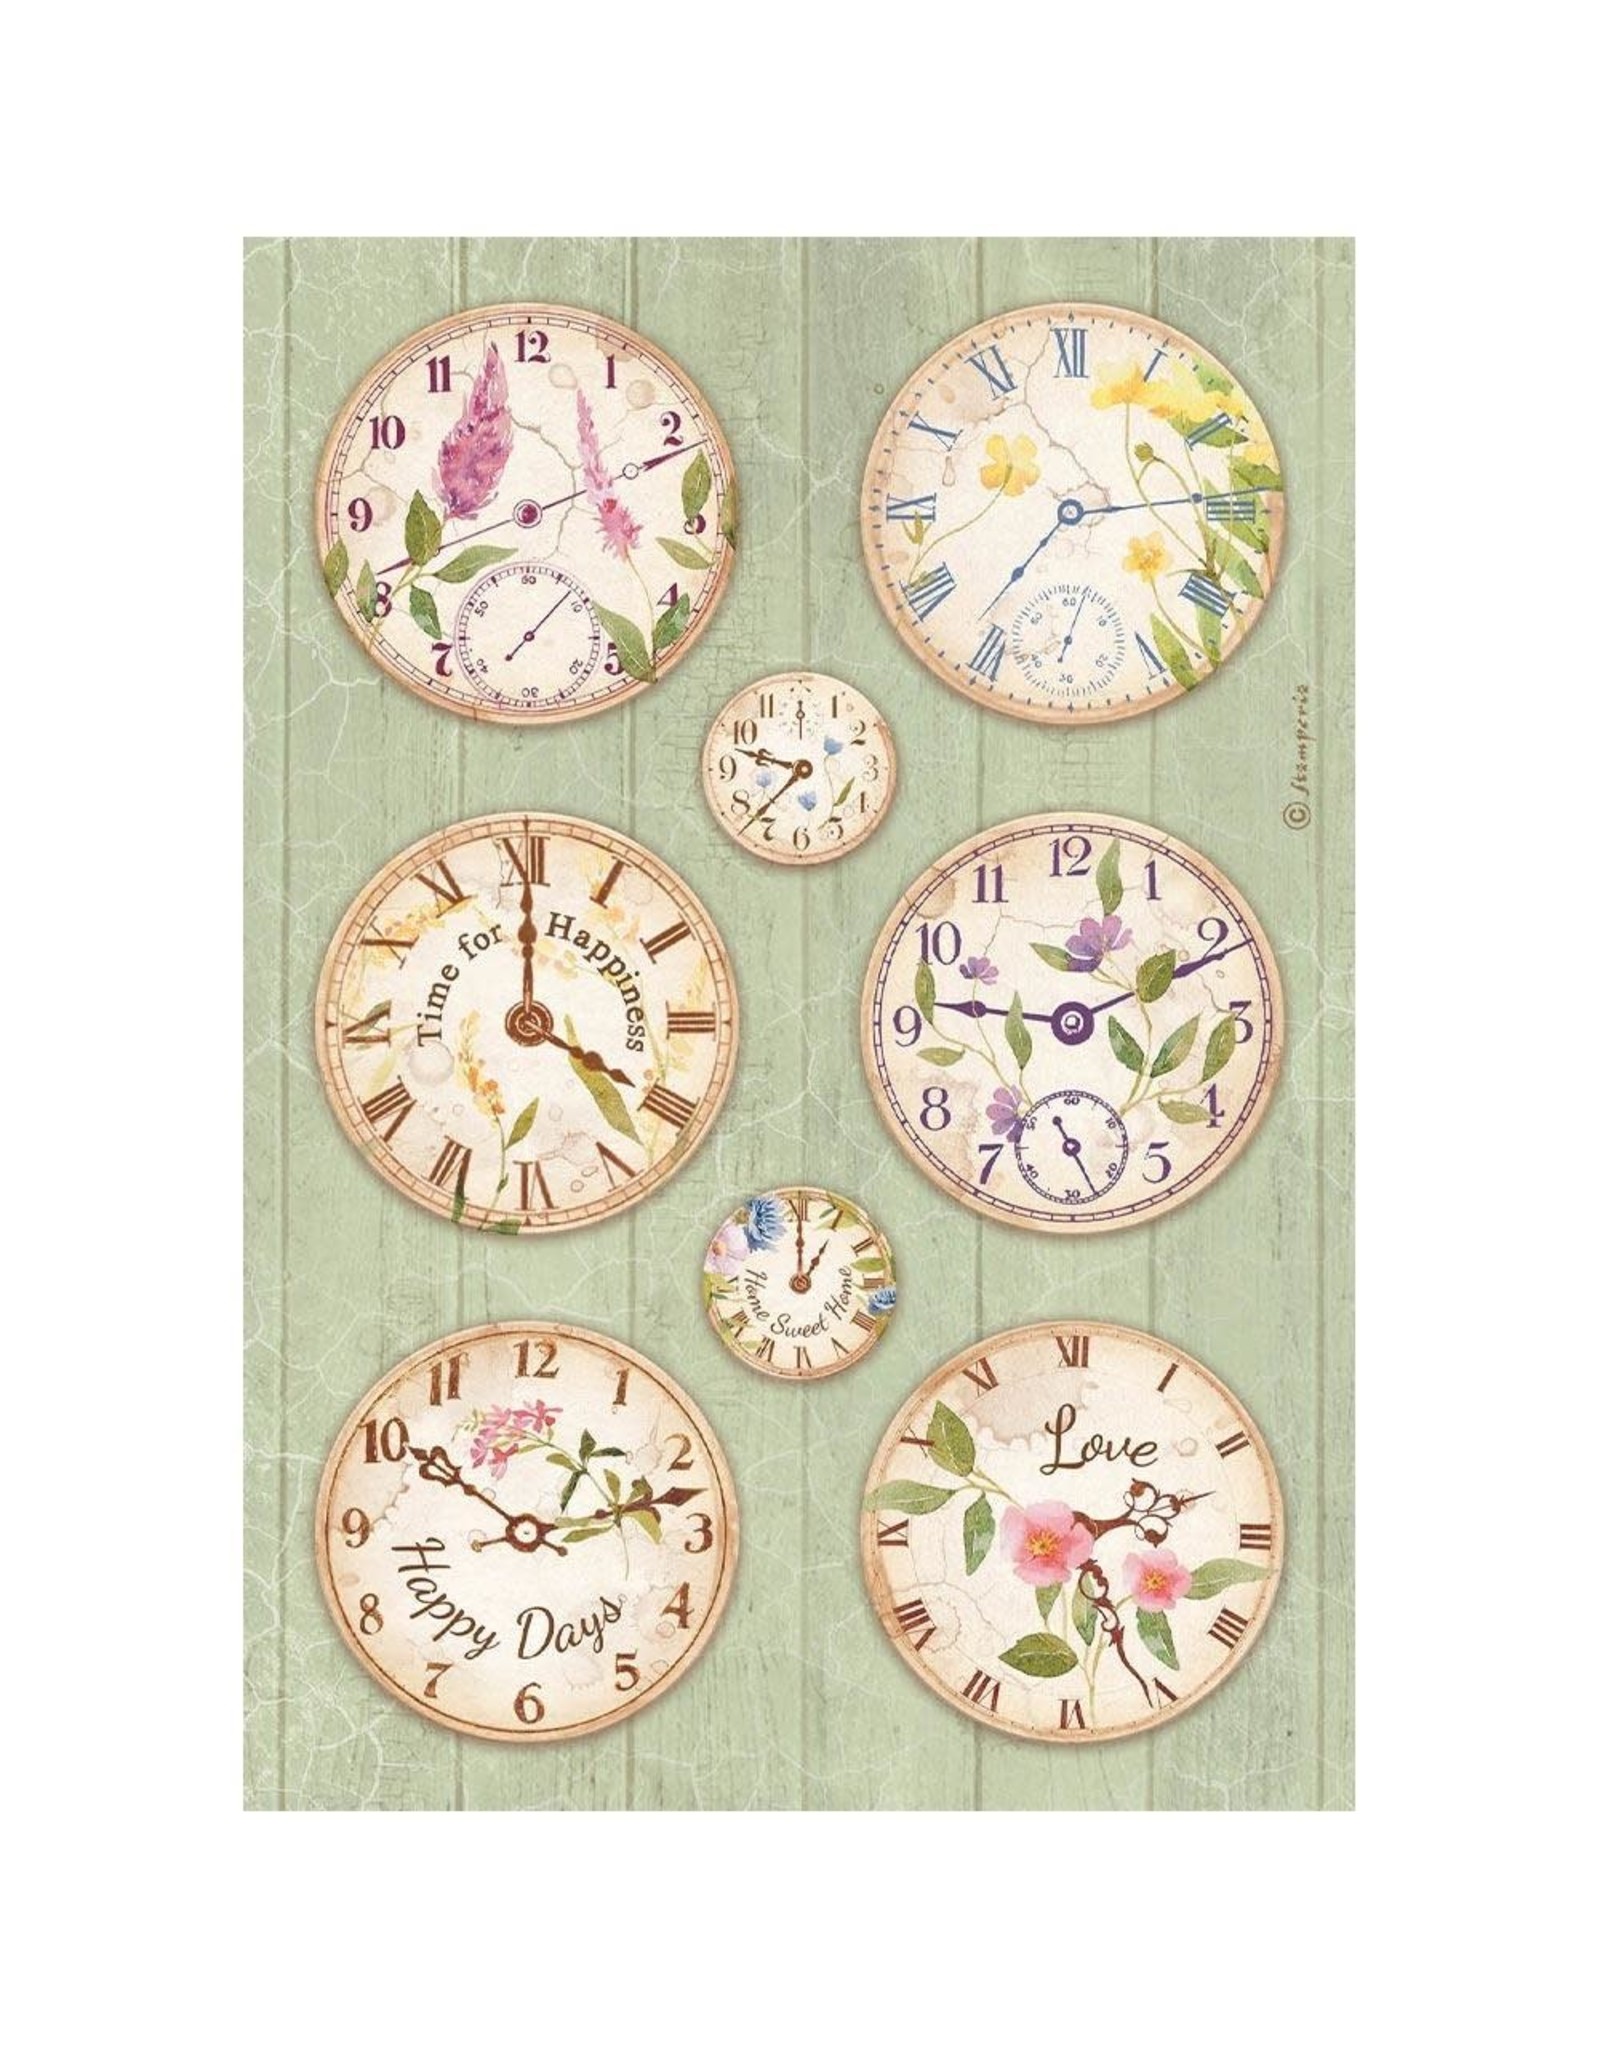 STAMPERIA STAMPERIA VICKY PAPAIOANNOU CREATE HAPPINESS WELCOME HOME CLOCKS RICE PAPER DECOUPAGE 21X29.7CM